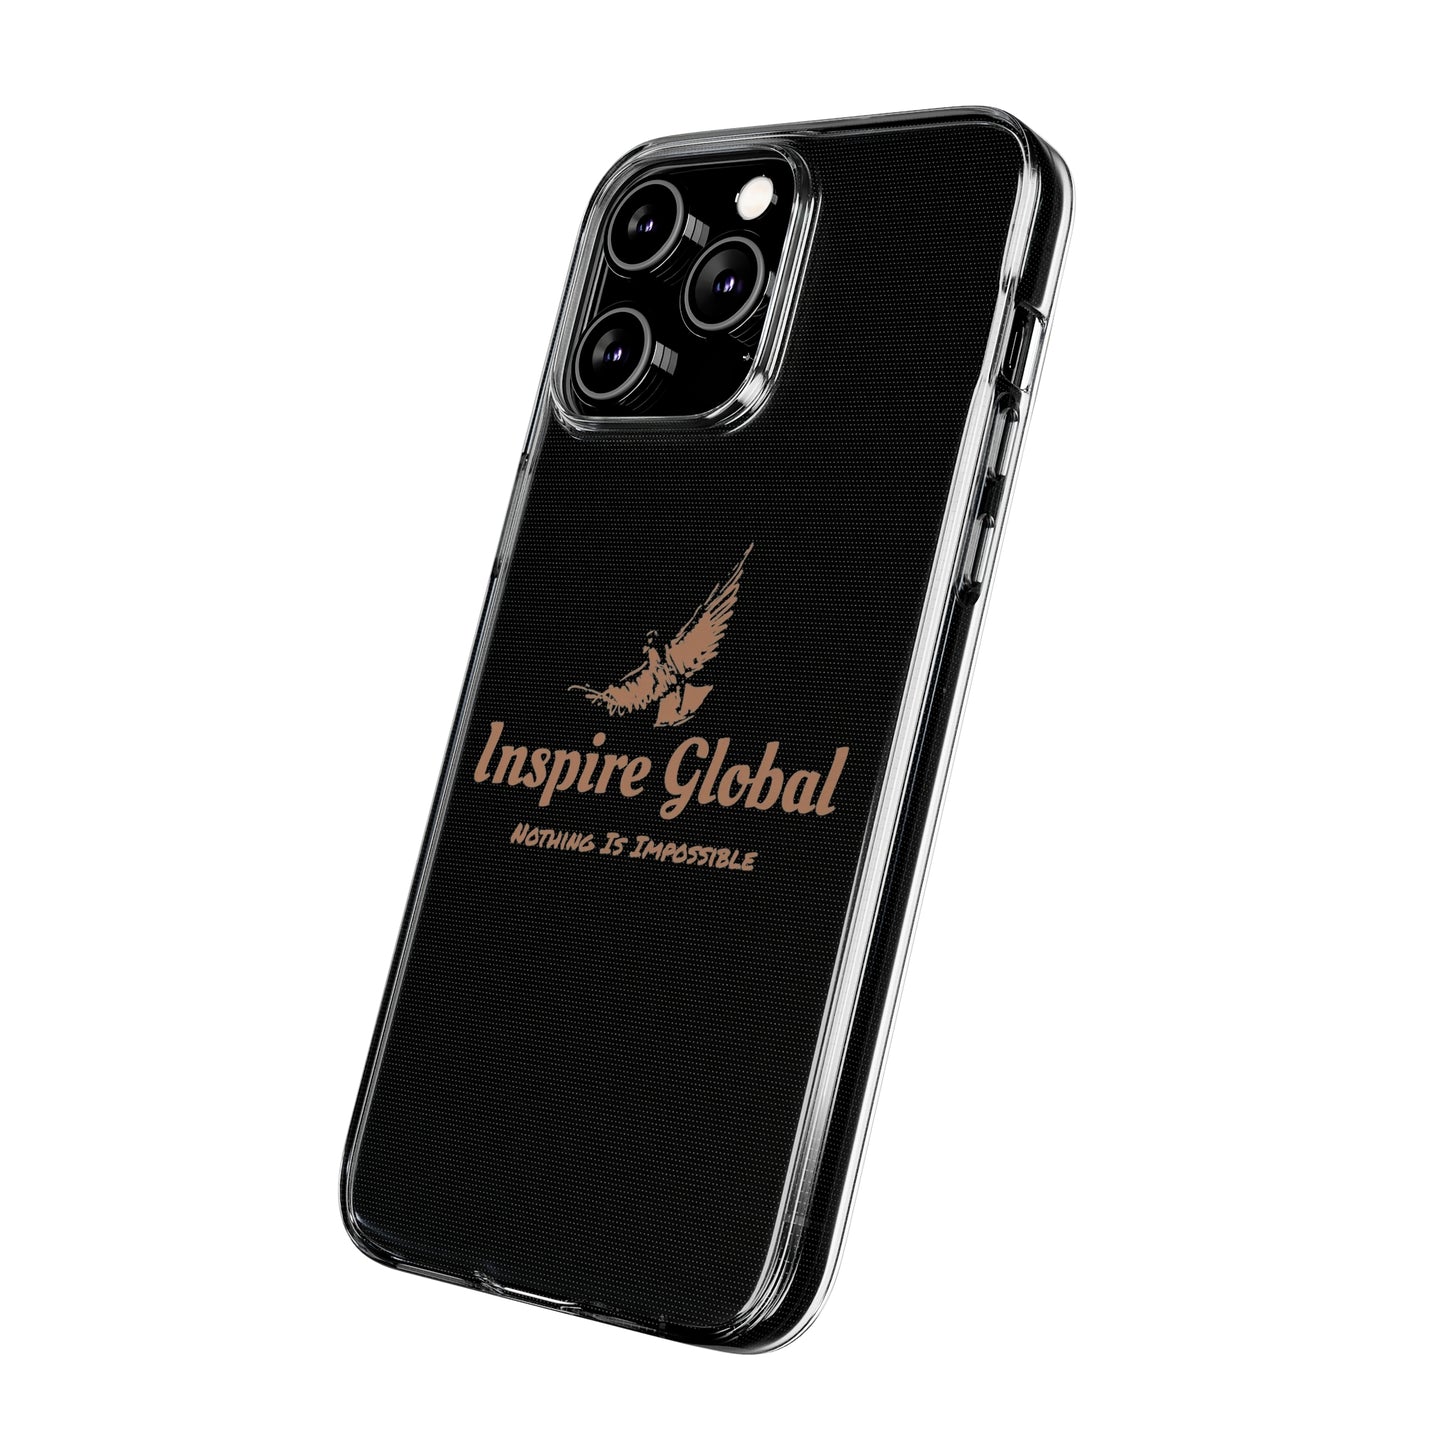 Soft Phone Cases Nothing Is Impossible